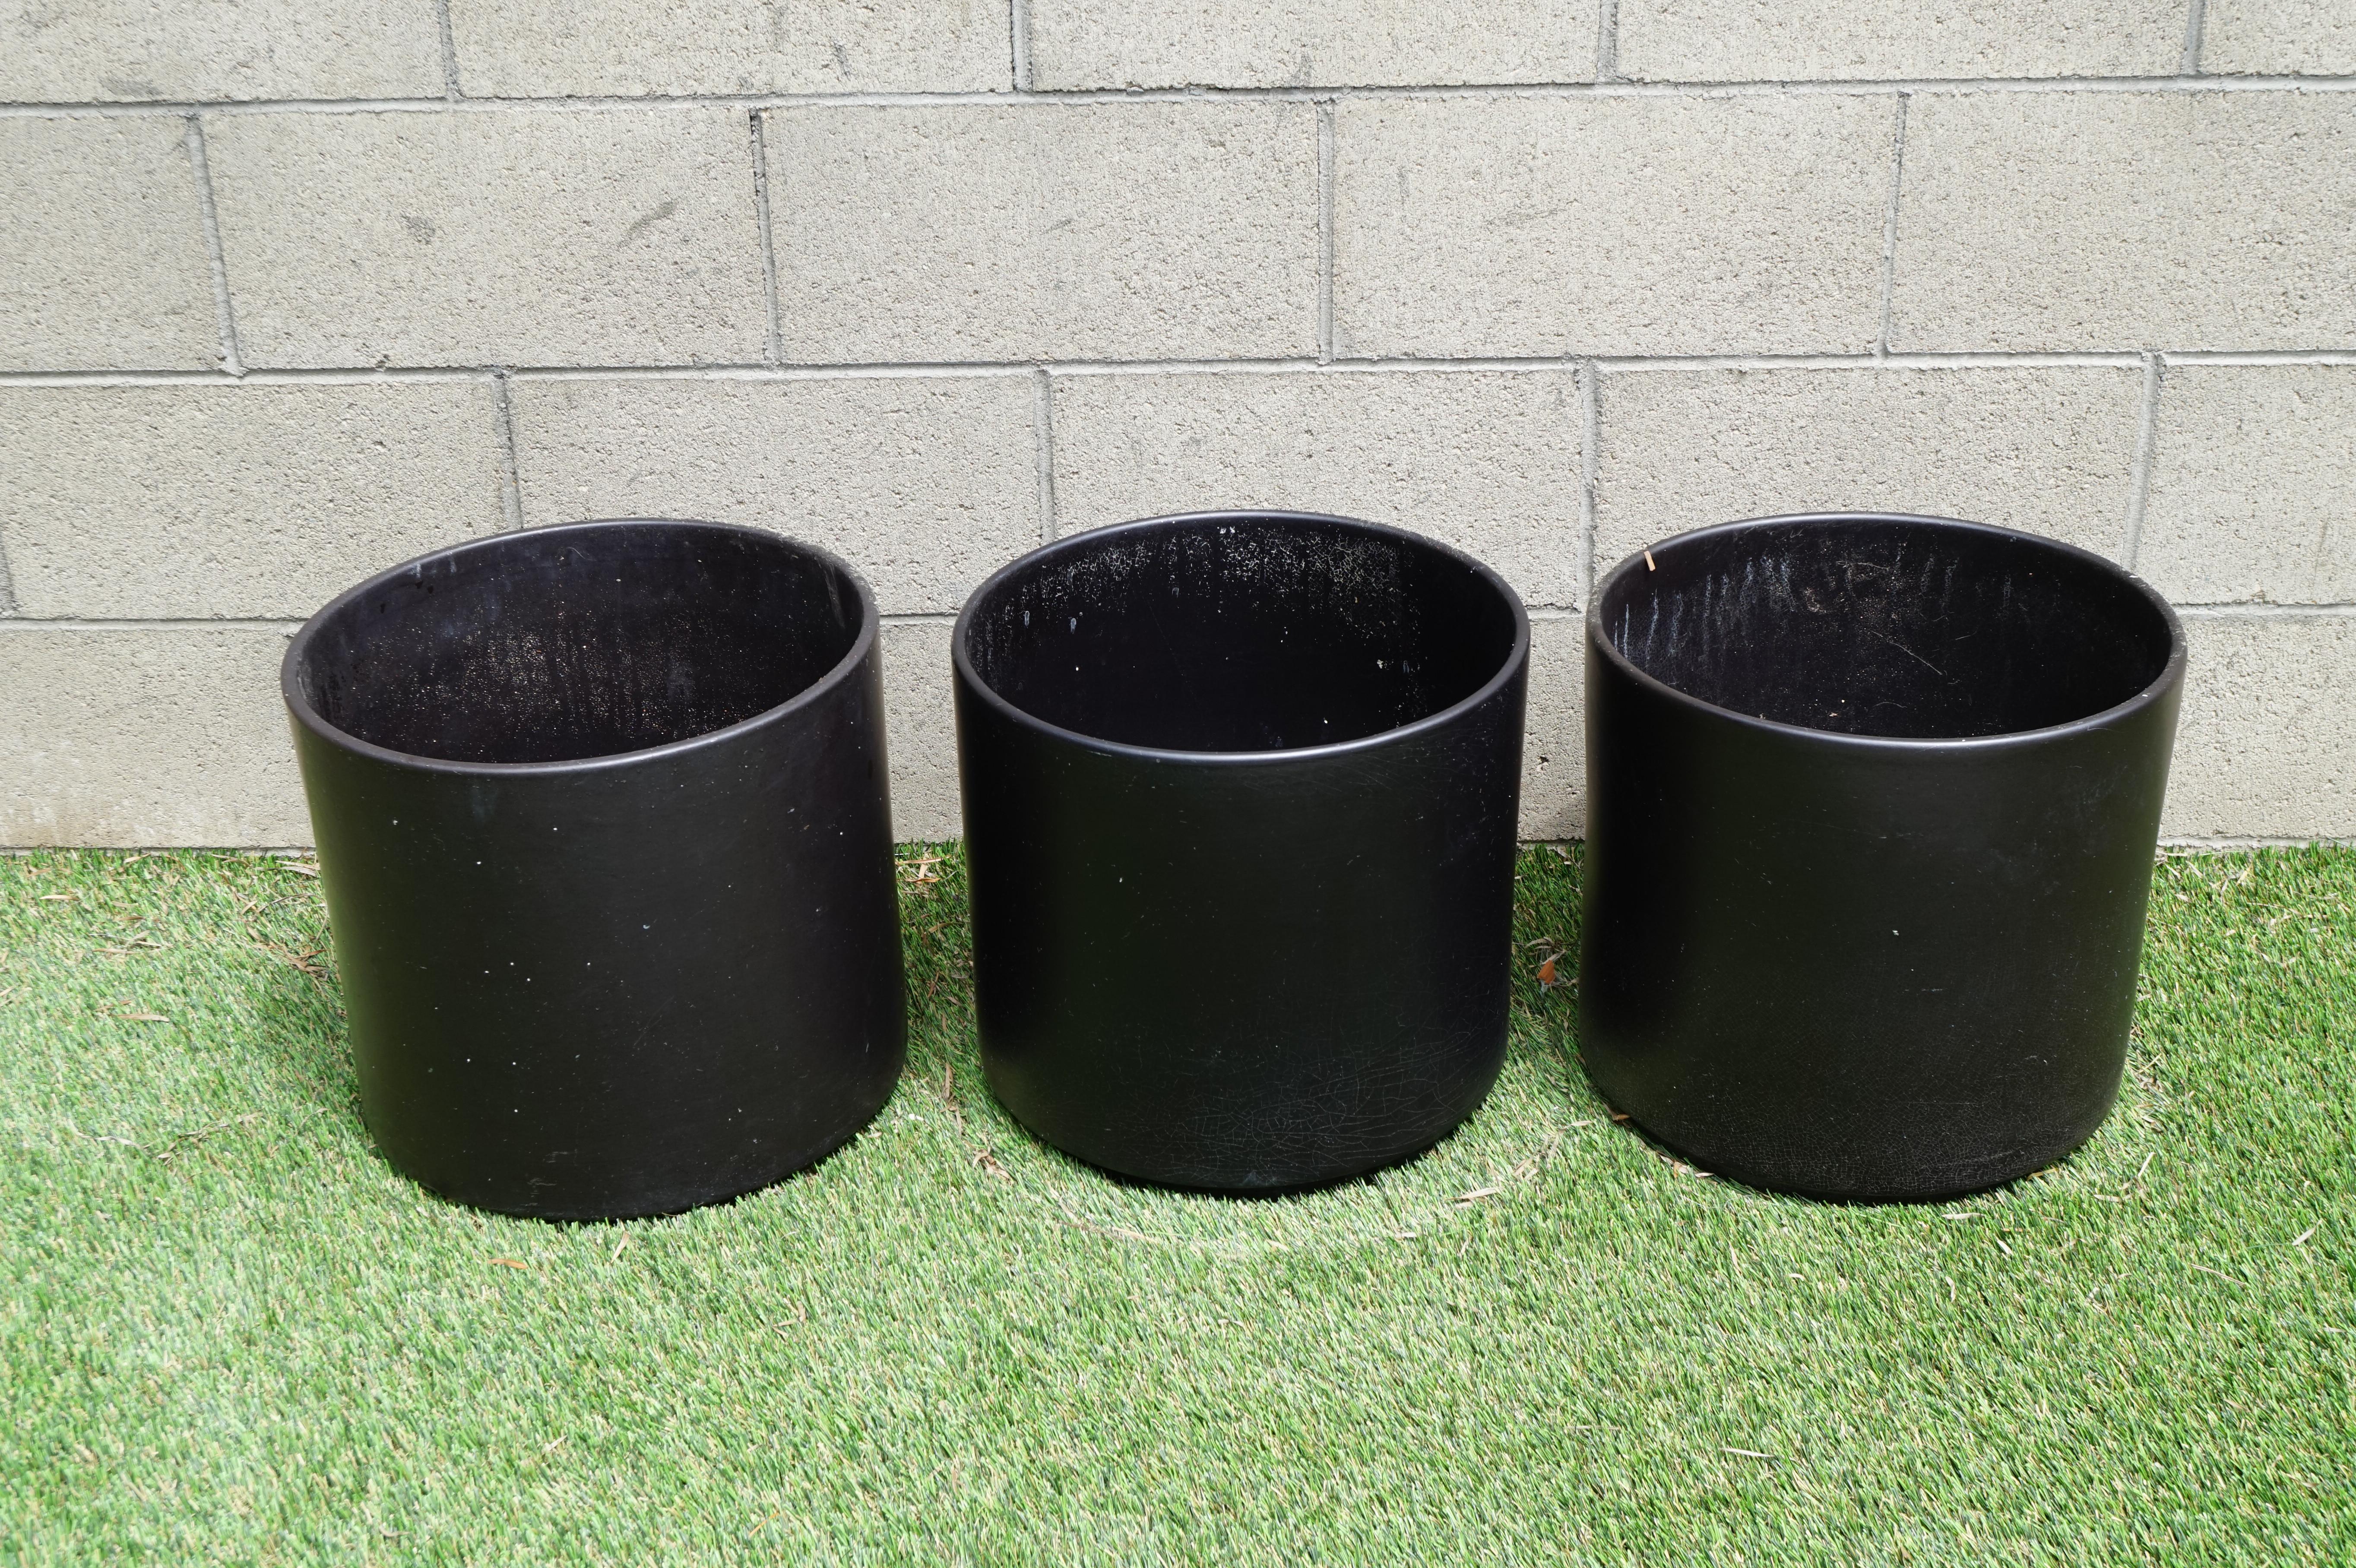 Mid-Century Modern Midcentury Architectural Pottery Black Ceramic Planters by Gainey 'Set of 3' For Sale